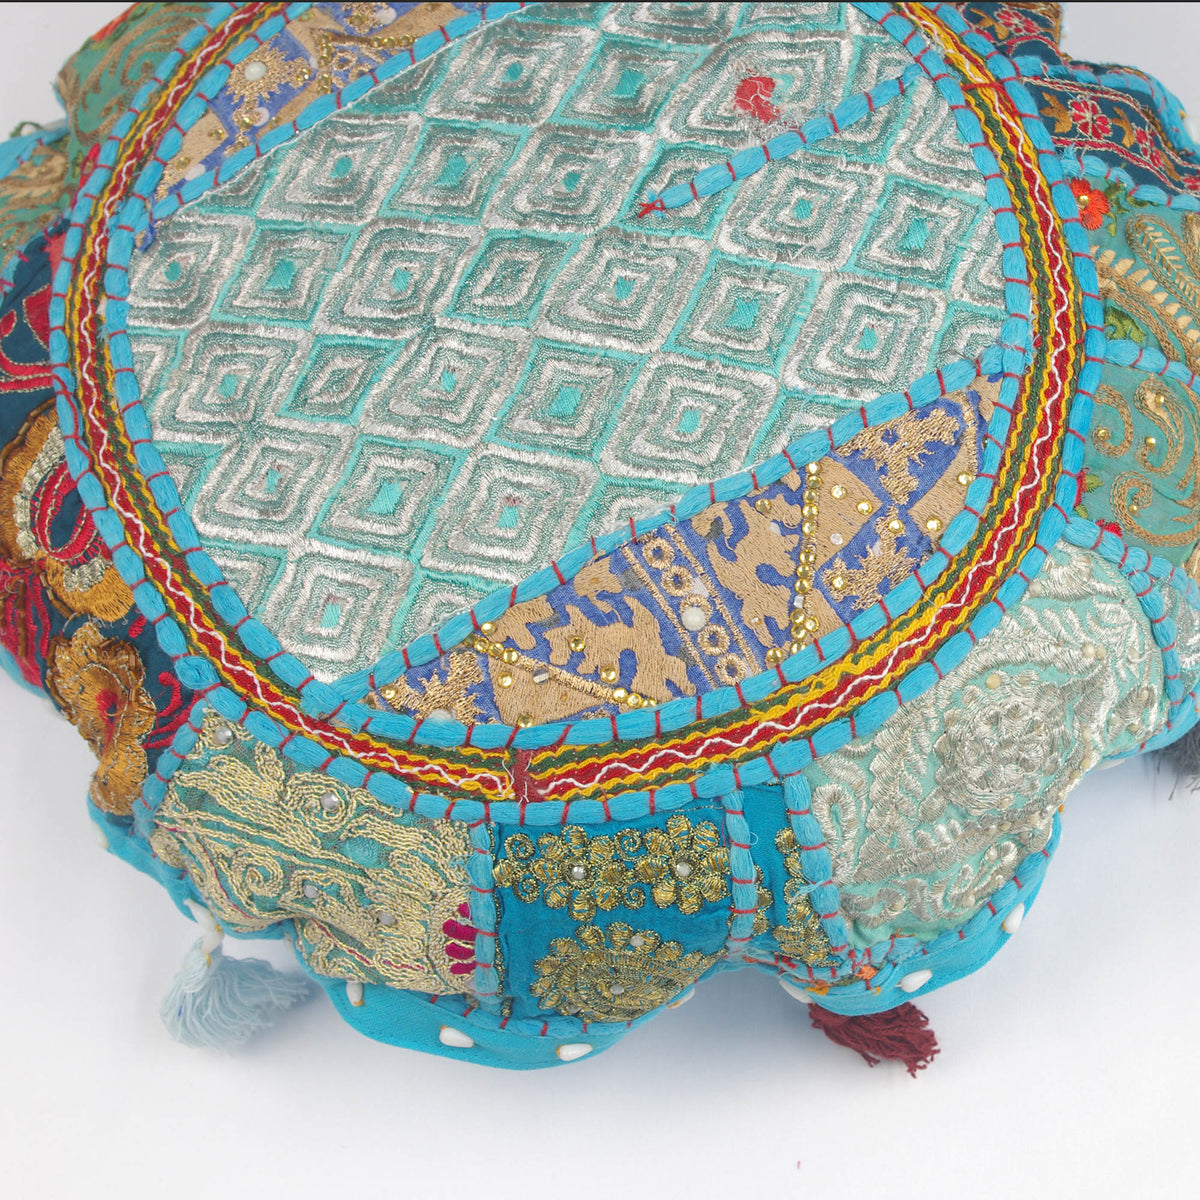 Sky Blue Flok Art Round Floor Embroidered Patchwork Pouf Ottoman Indian Vintage Cushion Cover 18"